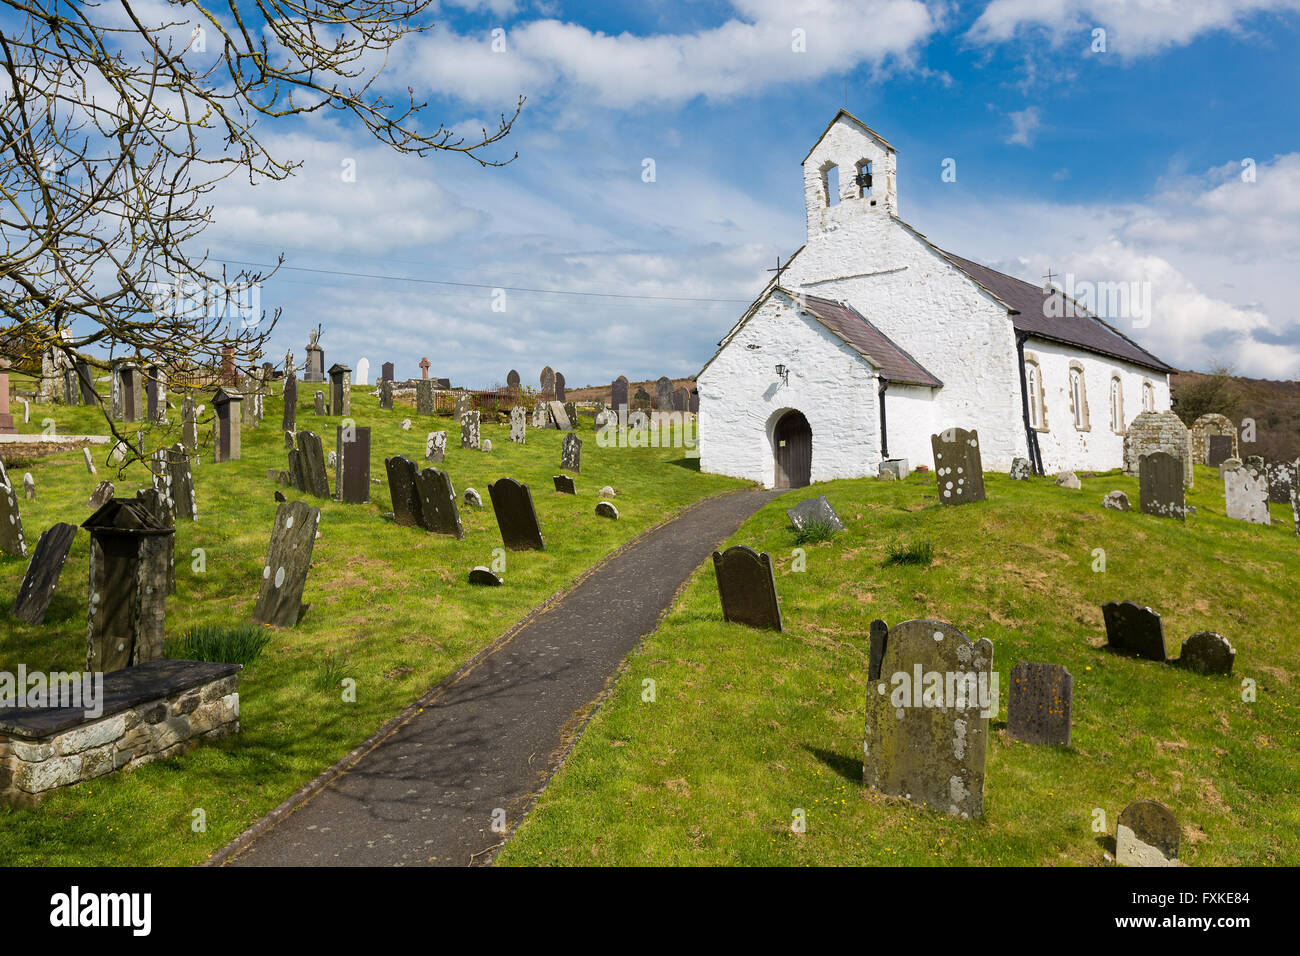 Exterior of St Michael's Church, Penbryn, Wales on a bright sunny day. Stock Photo